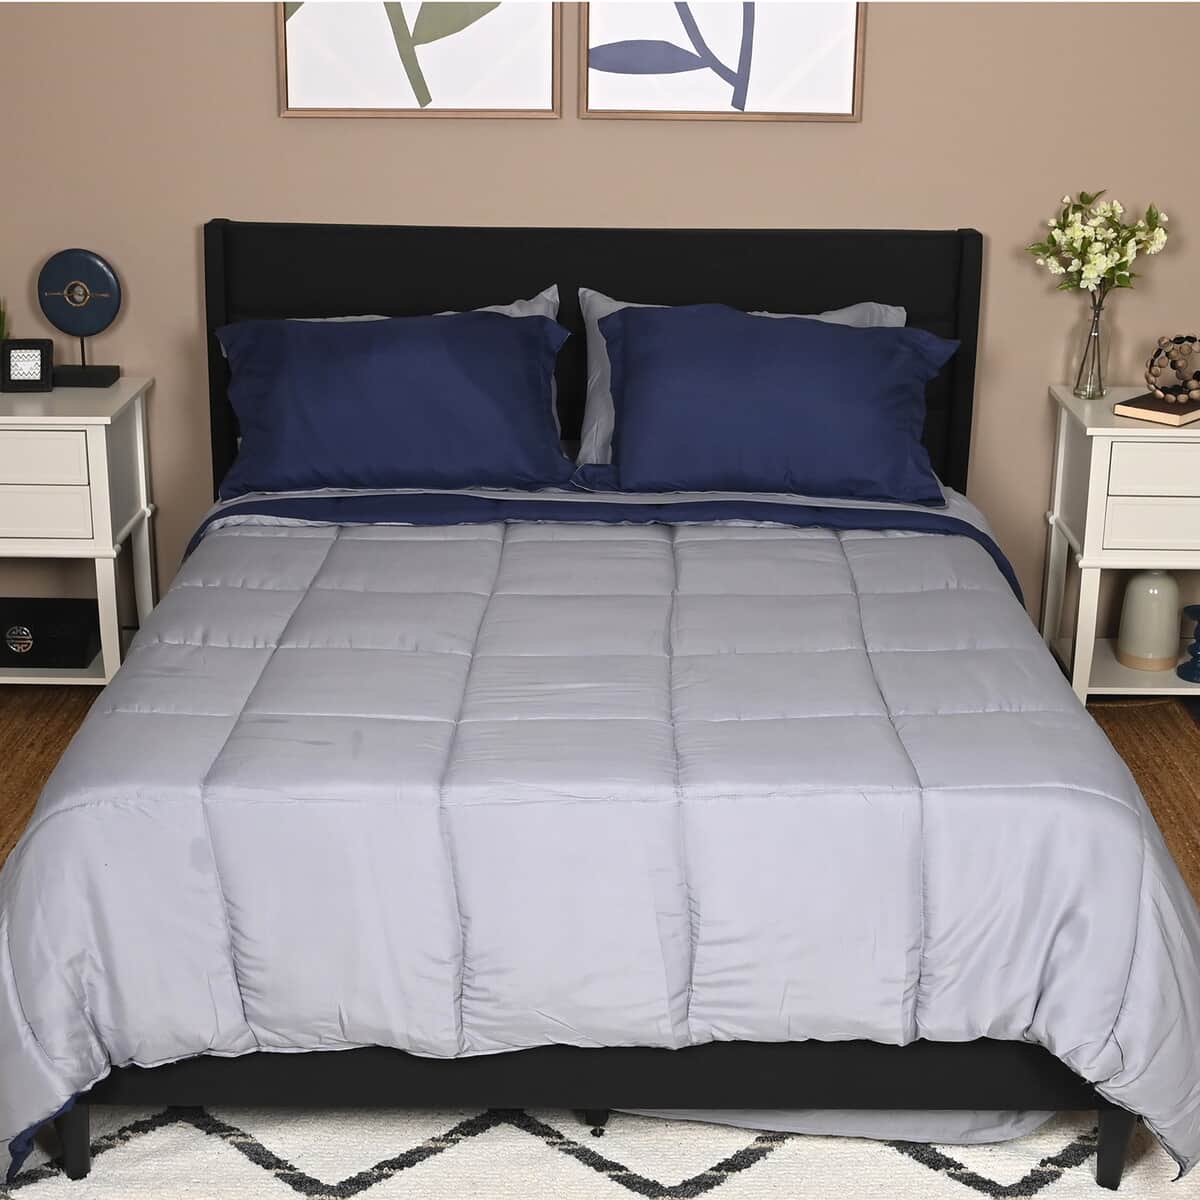 Victory Classic New York Closeout Lincoln Navy, Gray Reversible 5pc Bed in a Bag Comforter Set includes Sheet Set - XL Twin image number 1